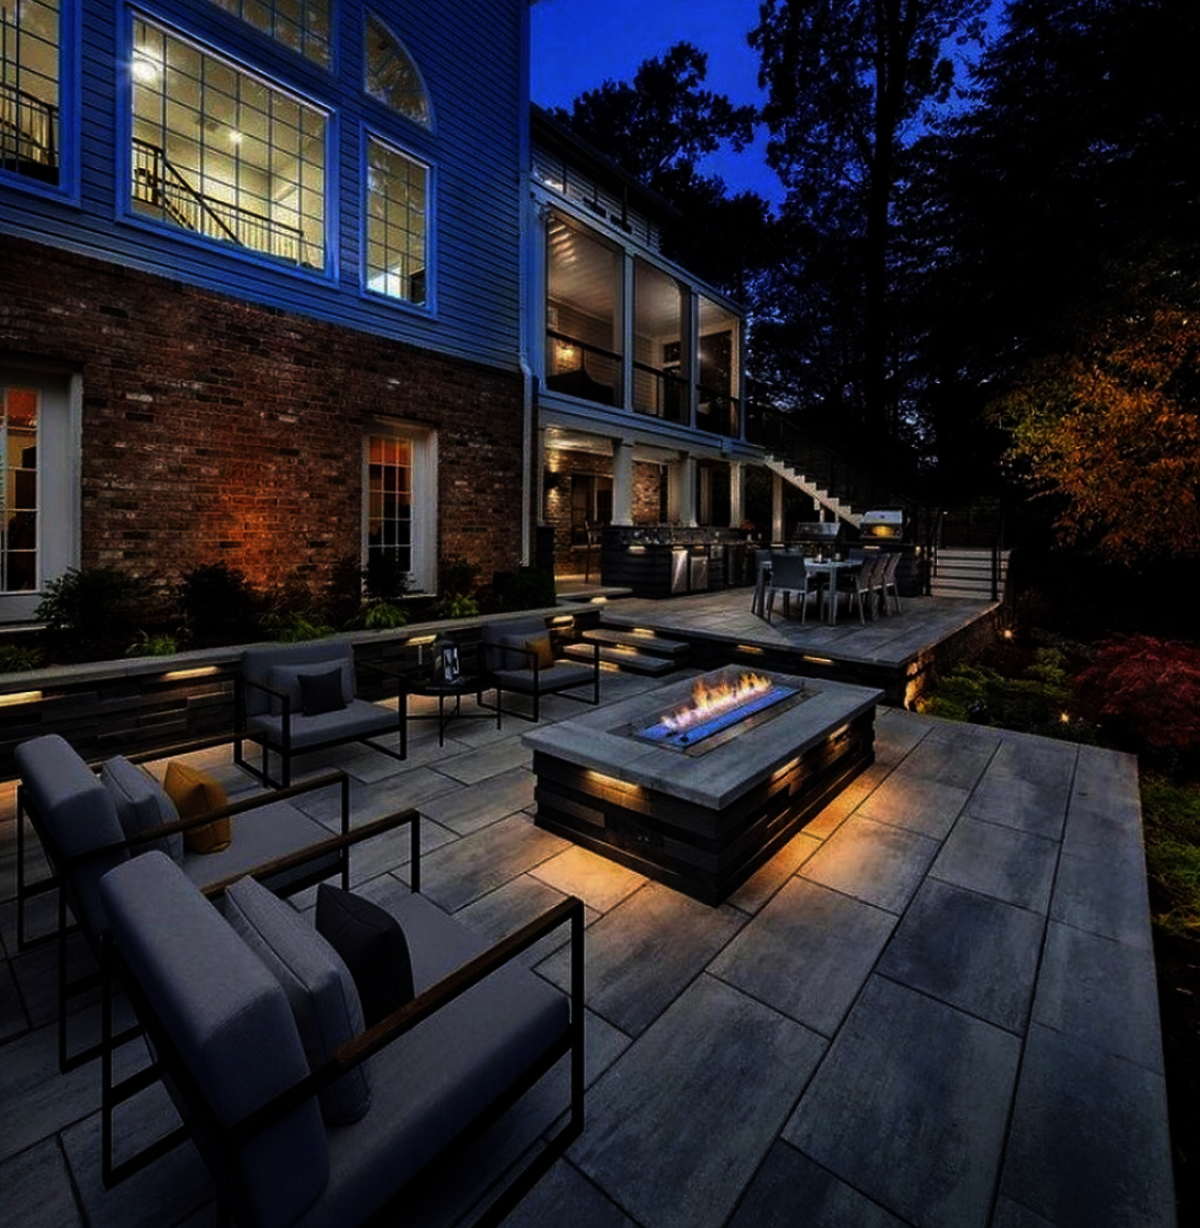 Outdoor living project showcasing stunning paver patio installation with modern fire pit, outdoor kitchen, retaining wall and landscape lighting | Expert Ward-Winning Landscape Design/Build in Bellevue | Home Service Specialists